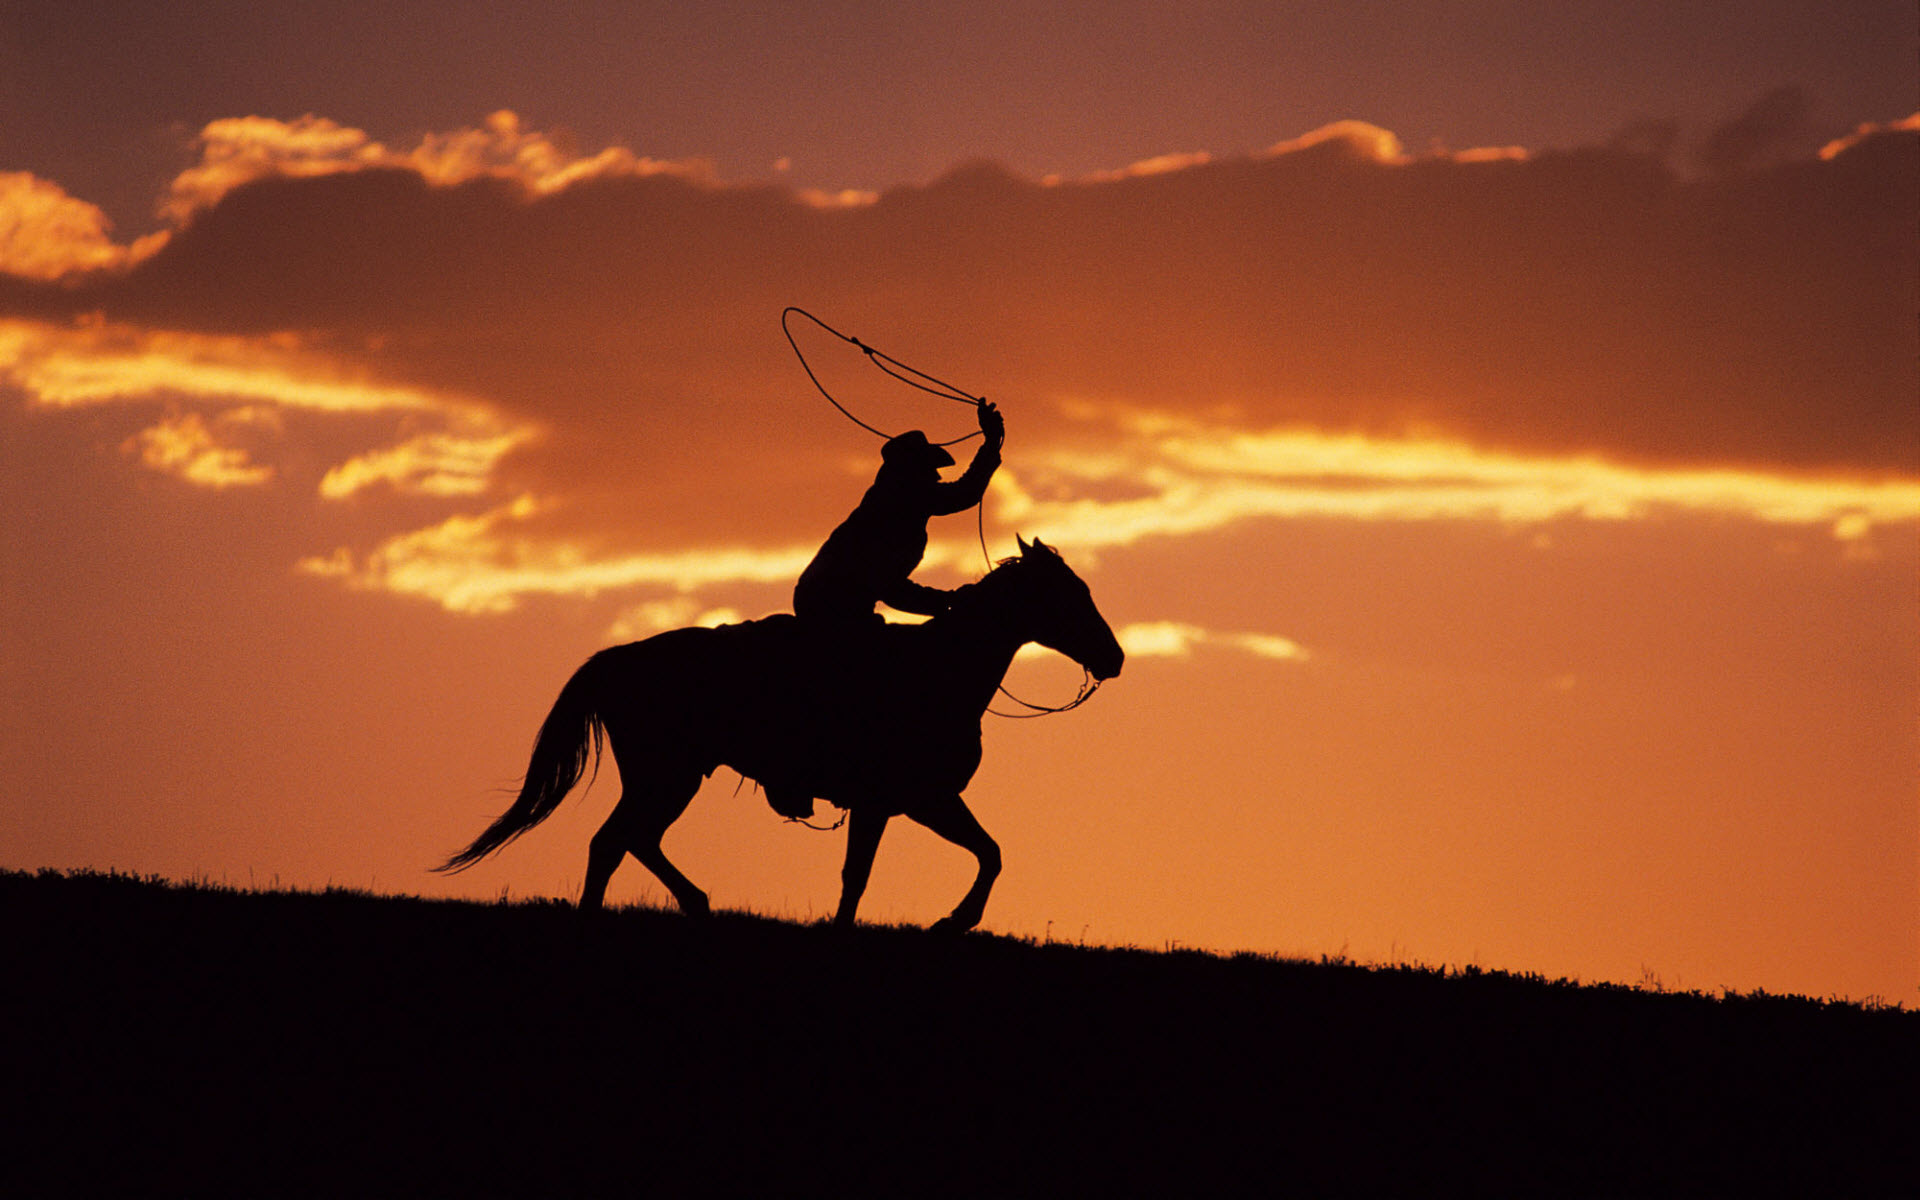 Western Cowboy at Sunset Wallpapers HD Wallpapers 1920x1200